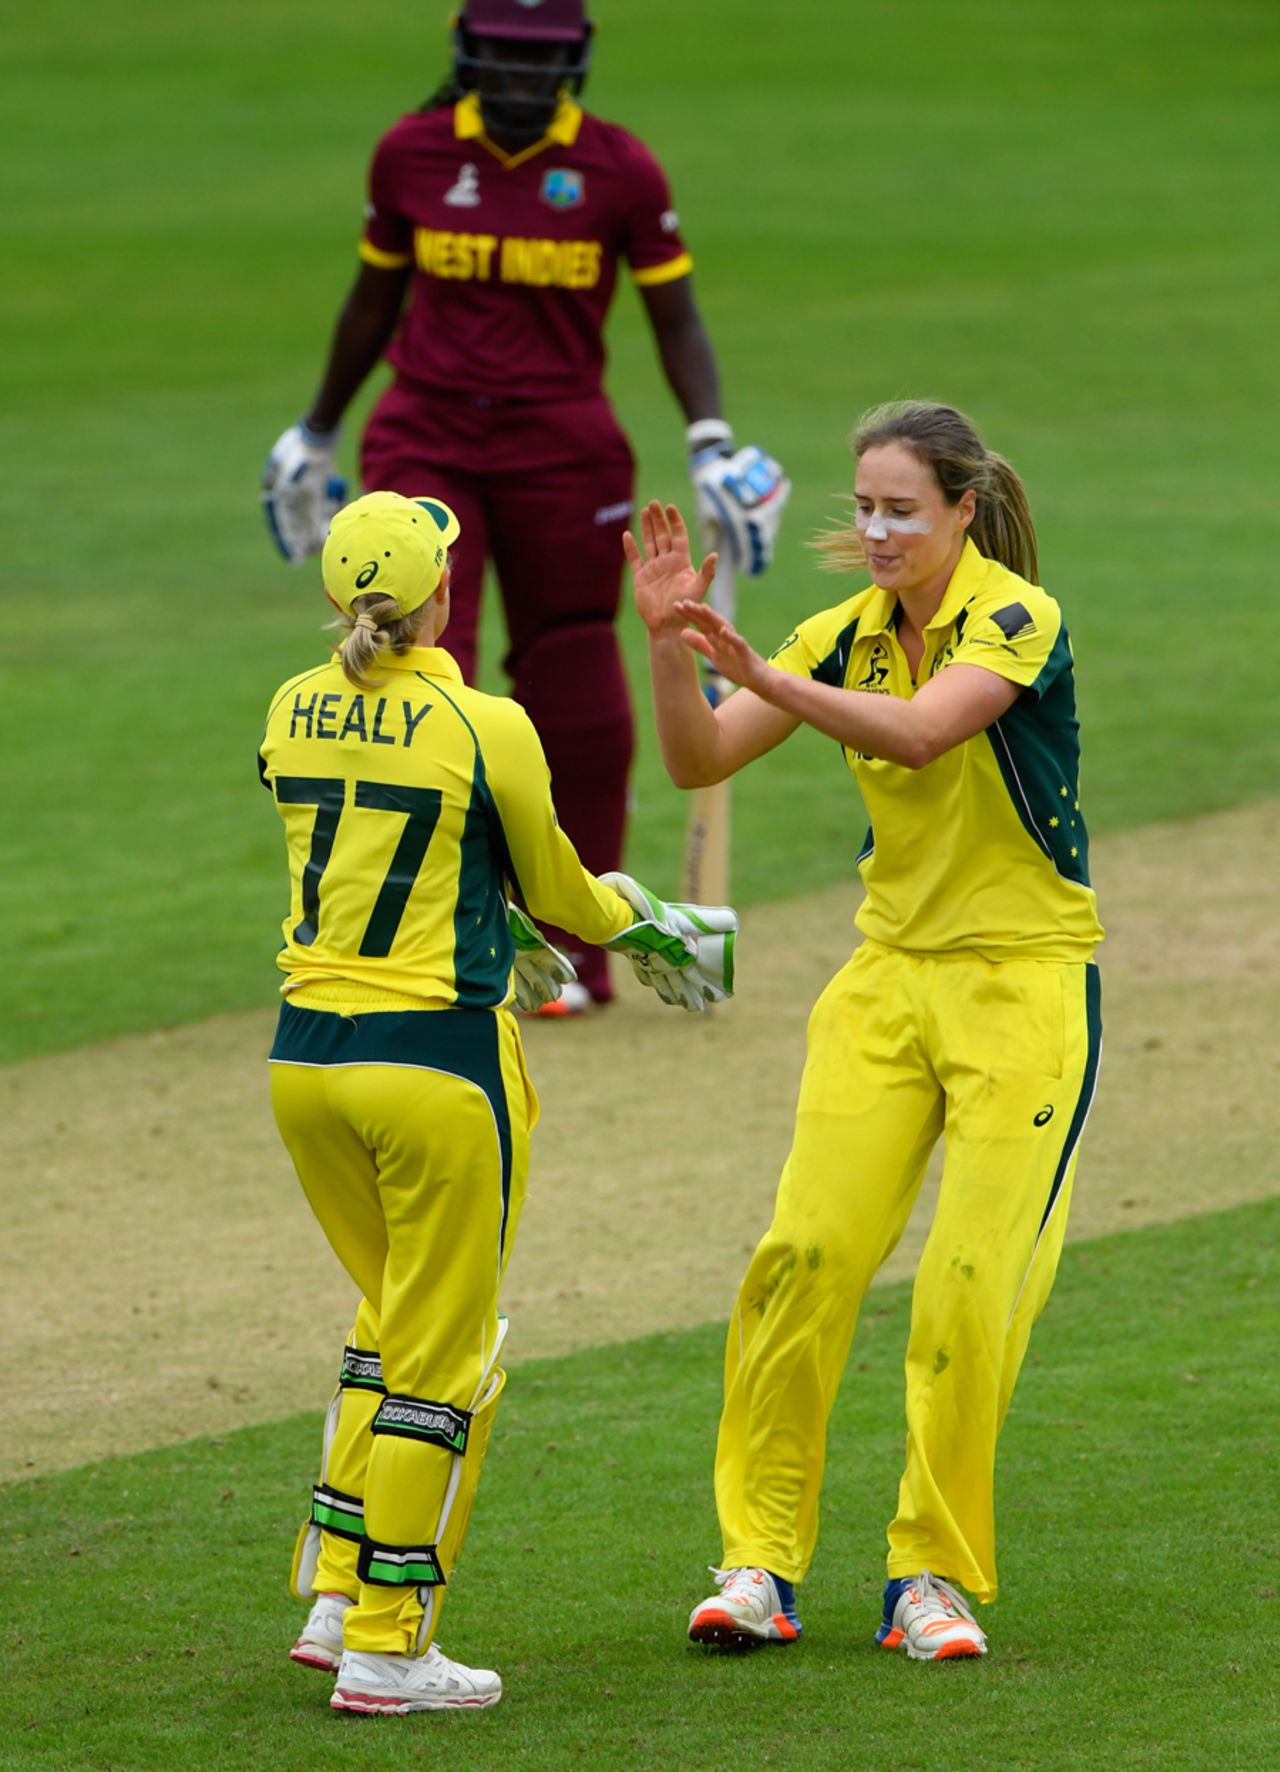 Ellyse Perry bagged a three-wicket haul after going for runs early, West Indies v Australia, Women's World Cup, Taunton, June 26, 2017